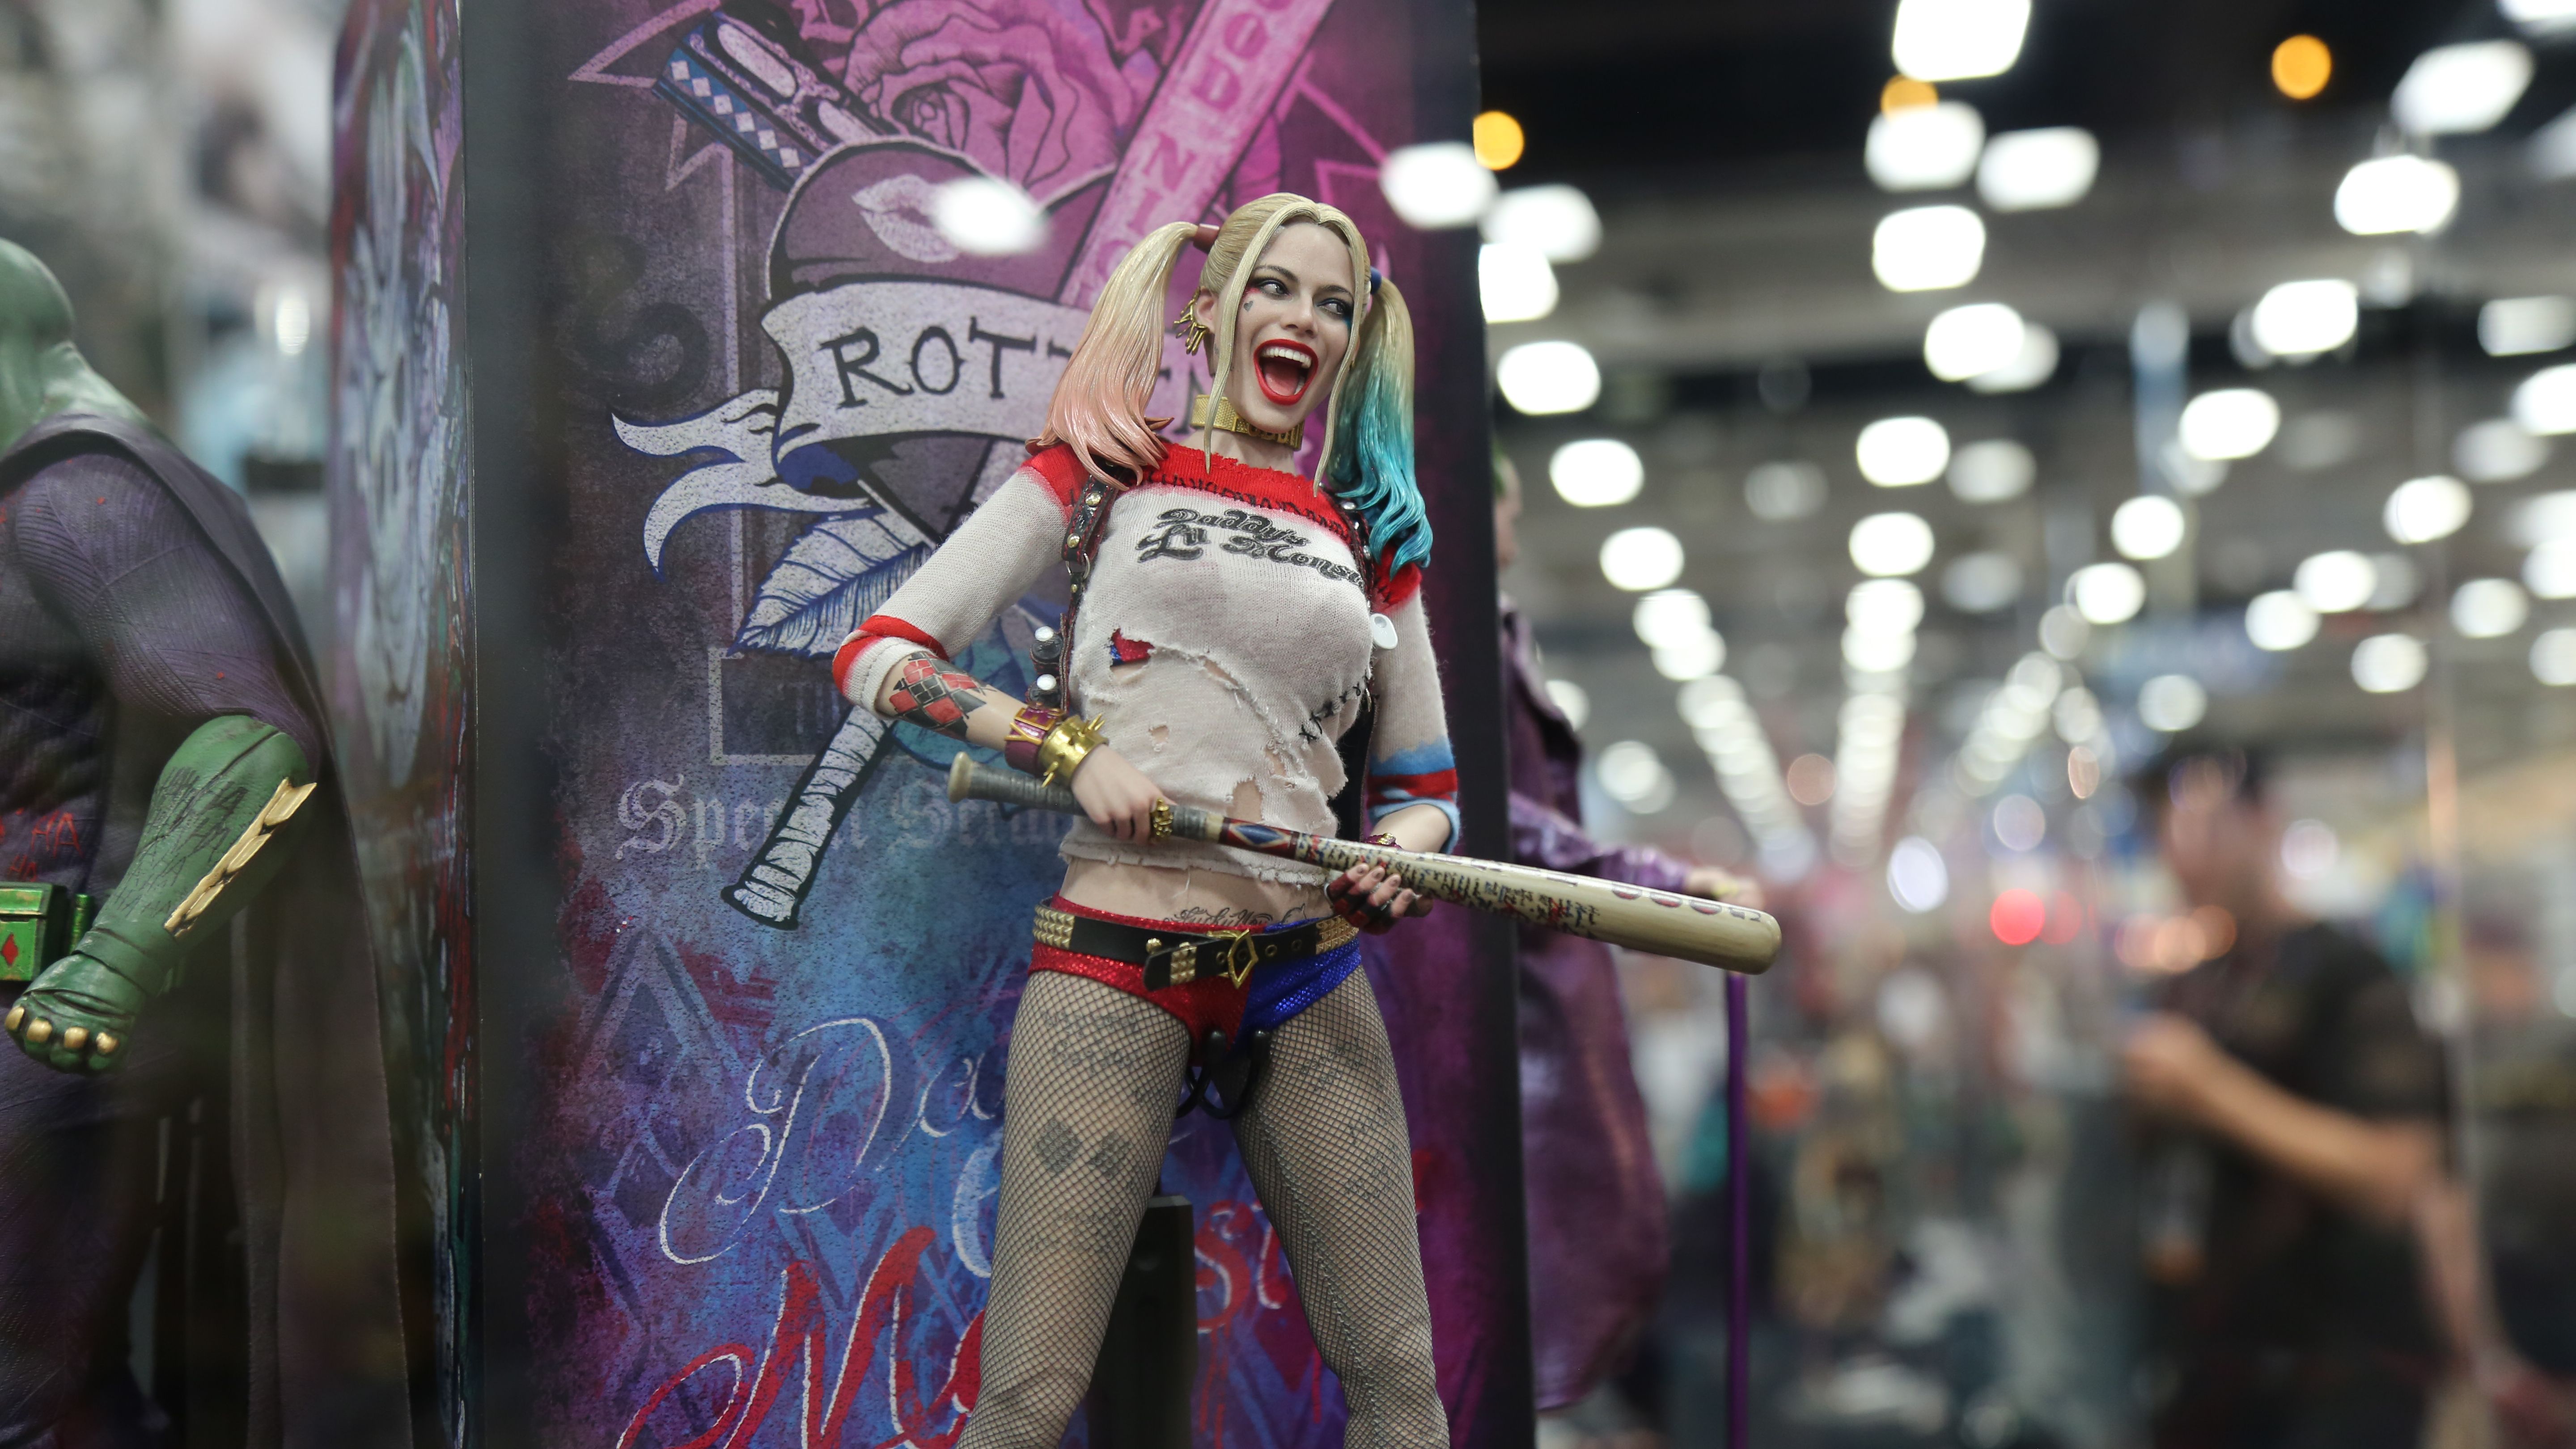 Suicide Squad Batman Joker Costume Revealed In Toy Images Collider Images, Photos, Reviews